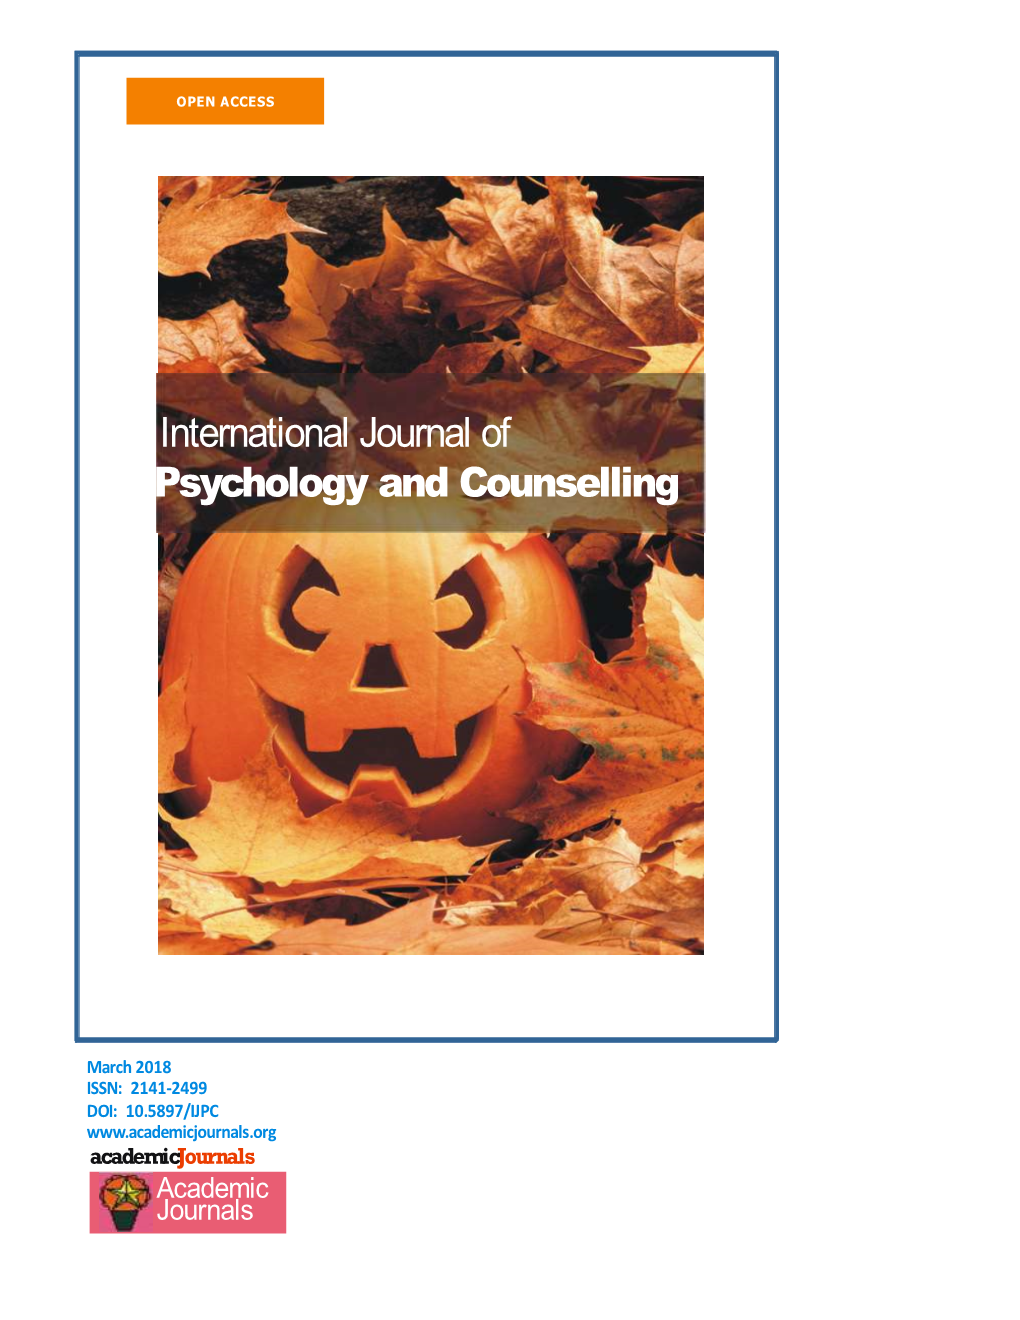 International Journal of Psychology and Counselling